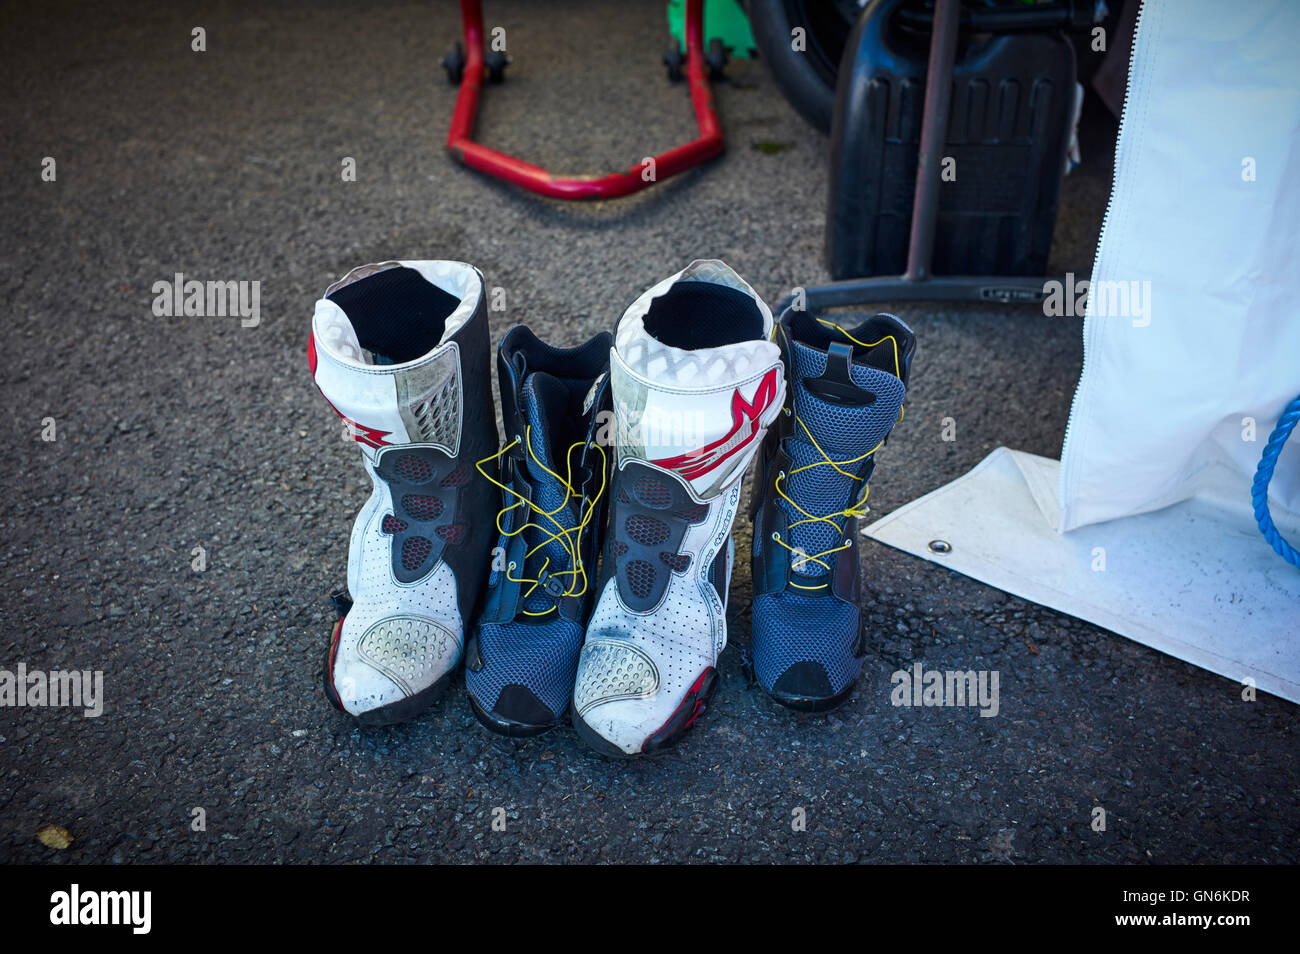 Boots and shoes at the Manx Festival of Motorcycling 2016 Stock Photo